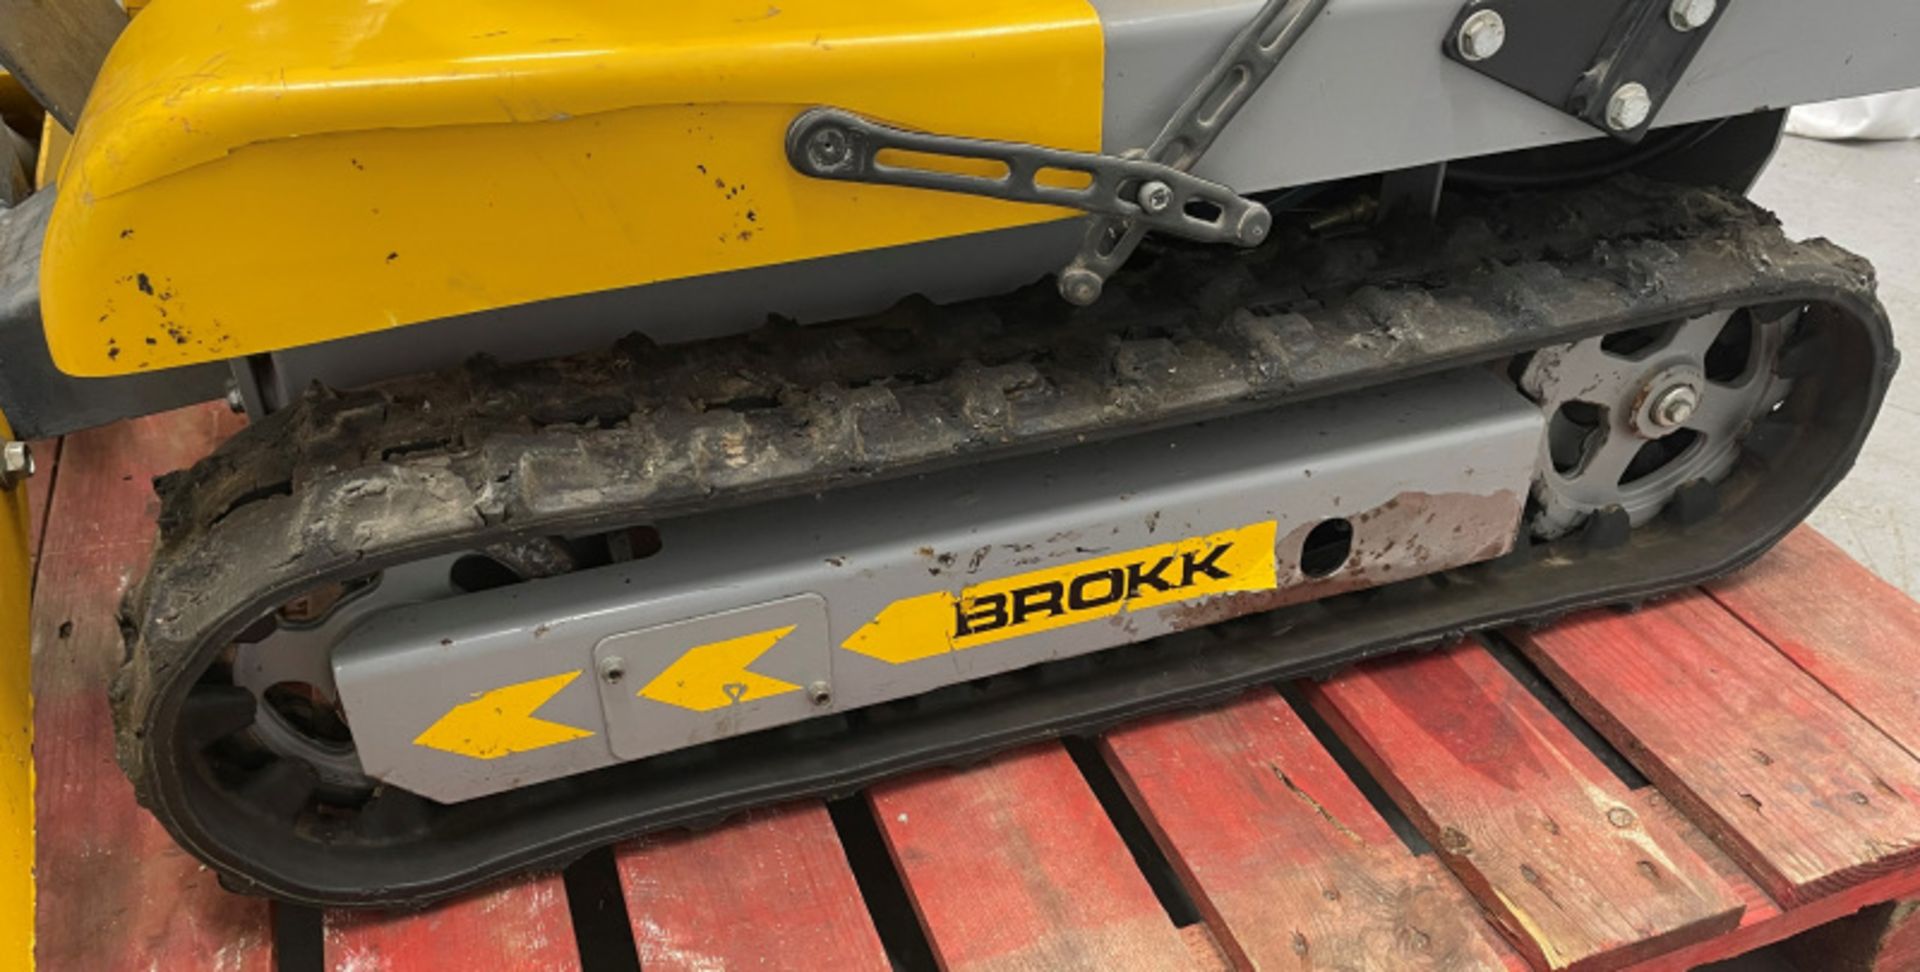 Brokk B40 Daemo Hydraulic breaker, various tooling & spare parts Please see pictures for attachments - Image 13 of 37